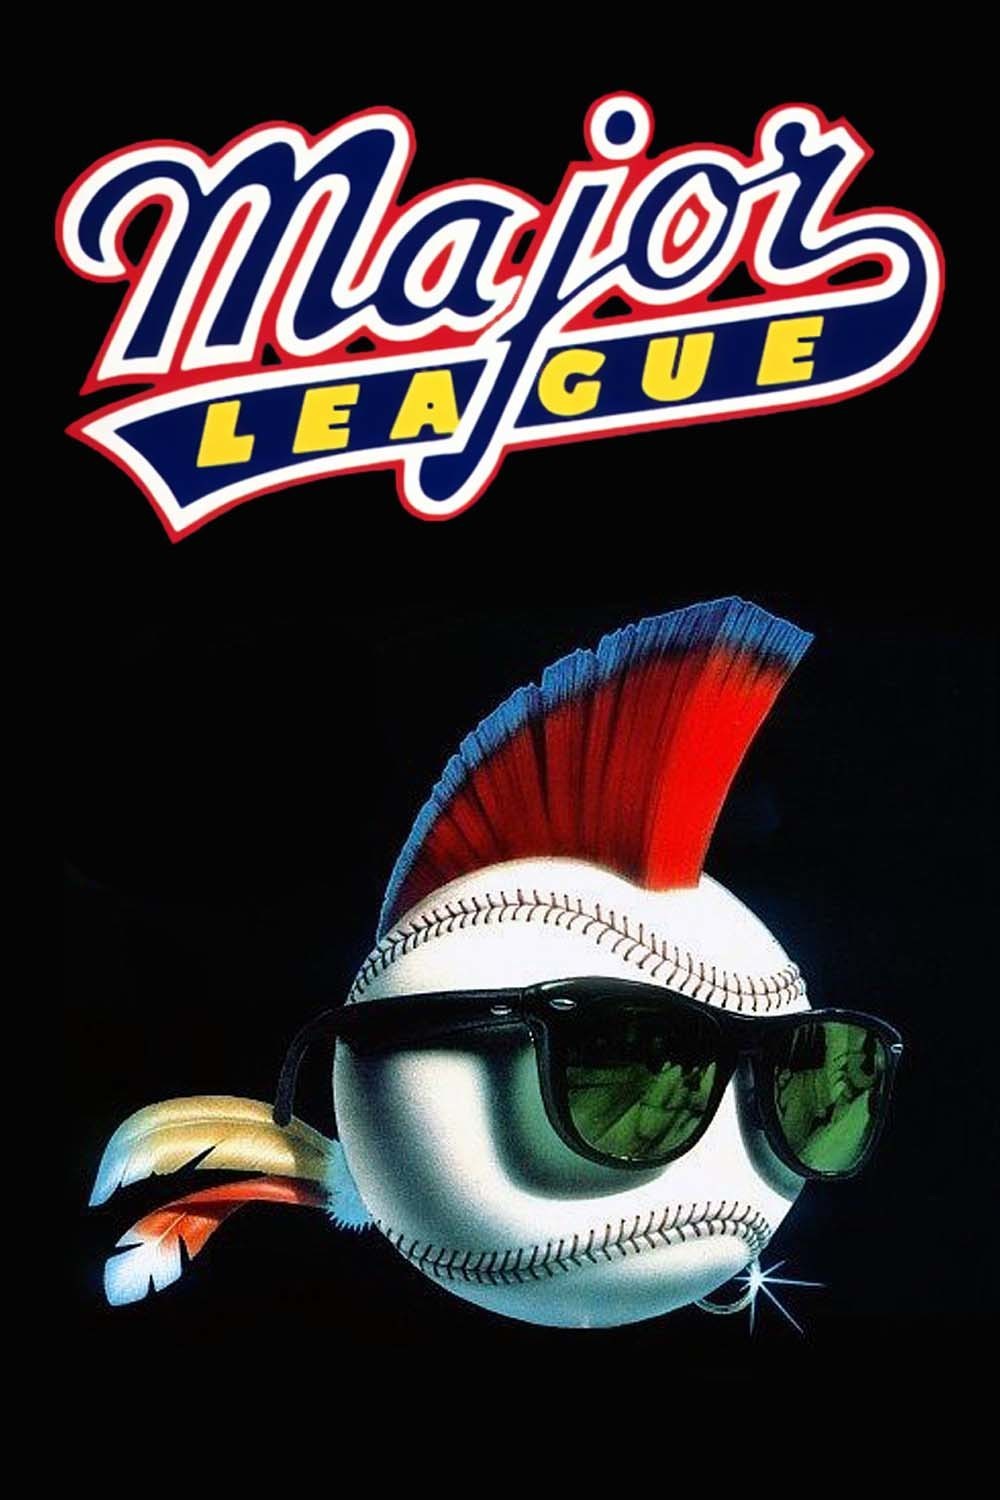 Major League - Shat the Movies